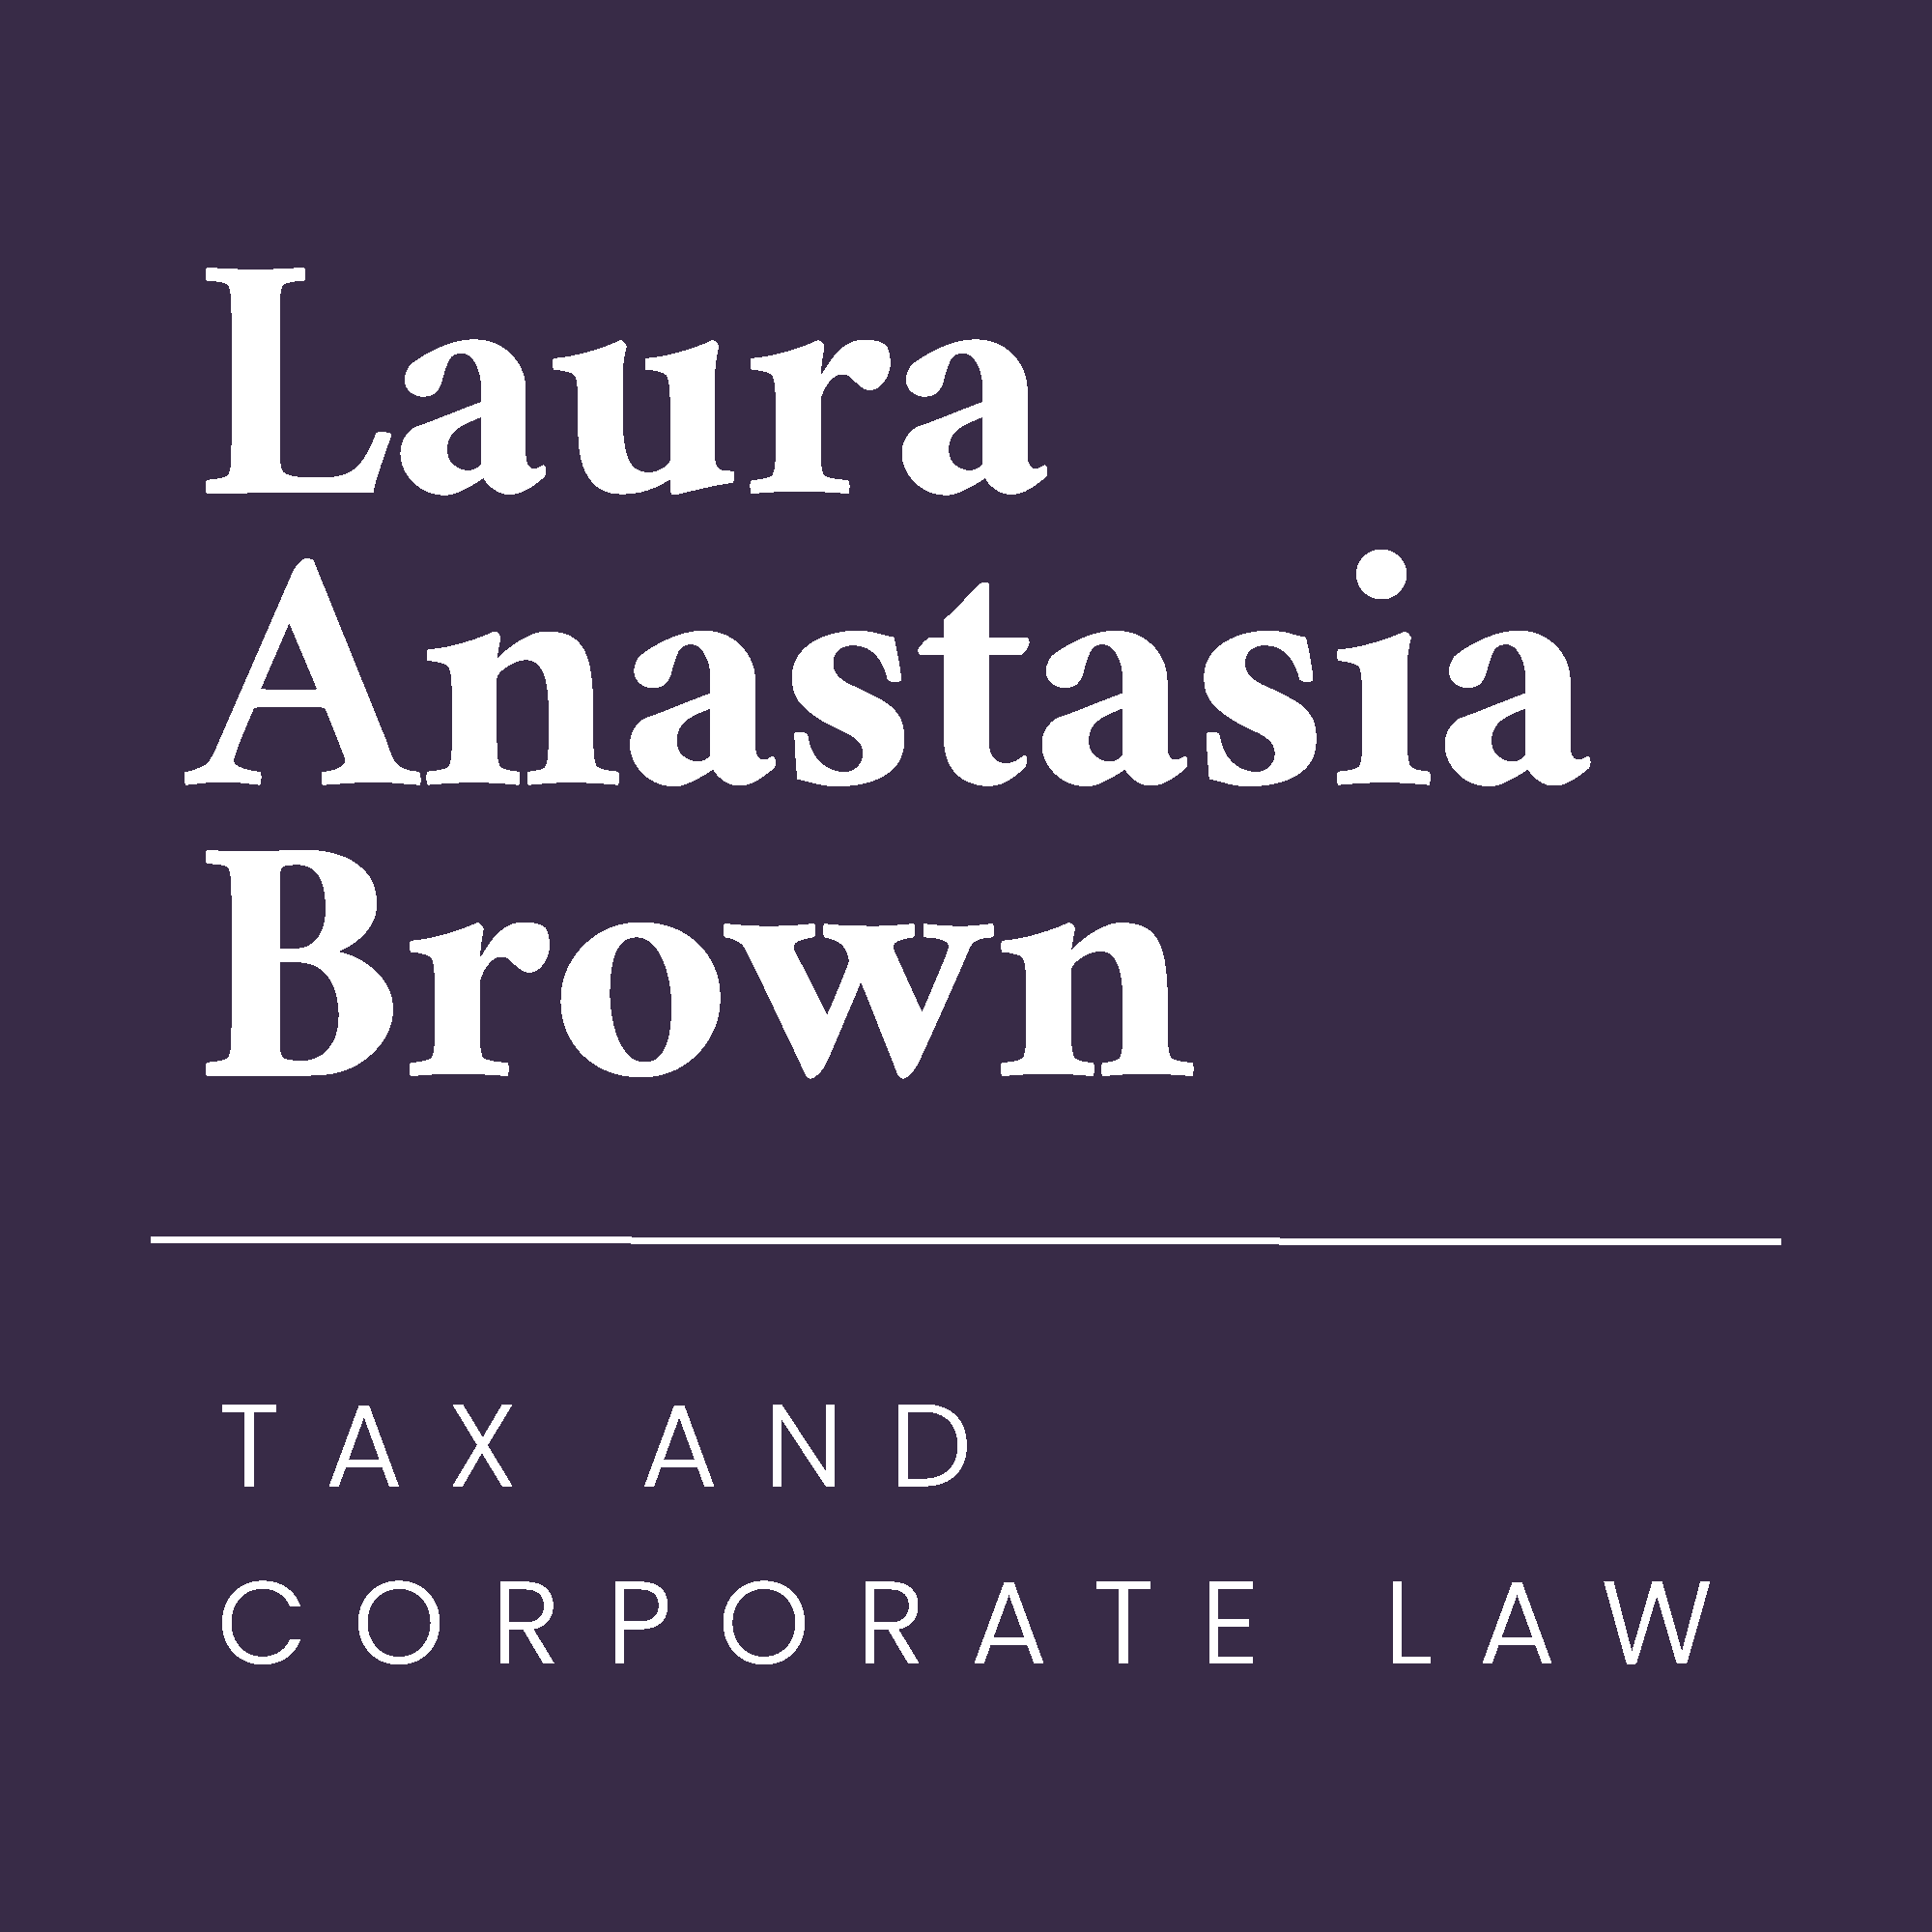 Laura Anastasia Brown, Attorney at Law - Rockland, MA 02370 - (781)871-3111 | ShowMeLocal.com